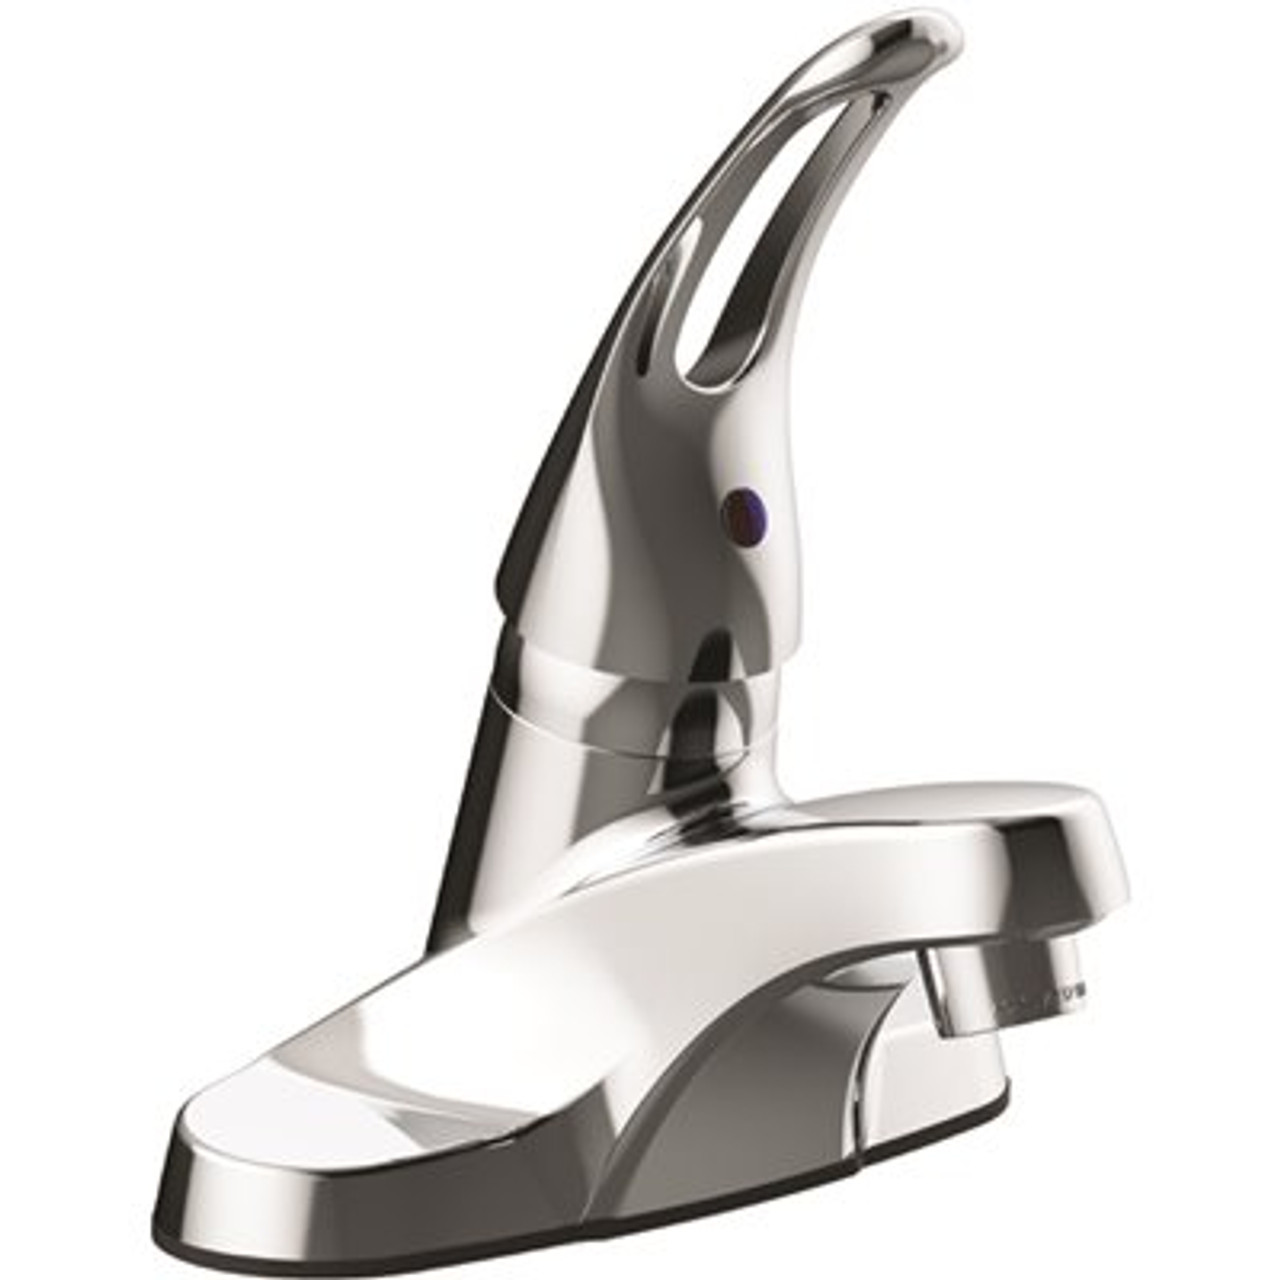 PRIVATE BRAND UNBRANDED 4 in. Centerset Single-Handle Bathroom Faucet Drilled for Pop Up in Chrome 1.2GPM